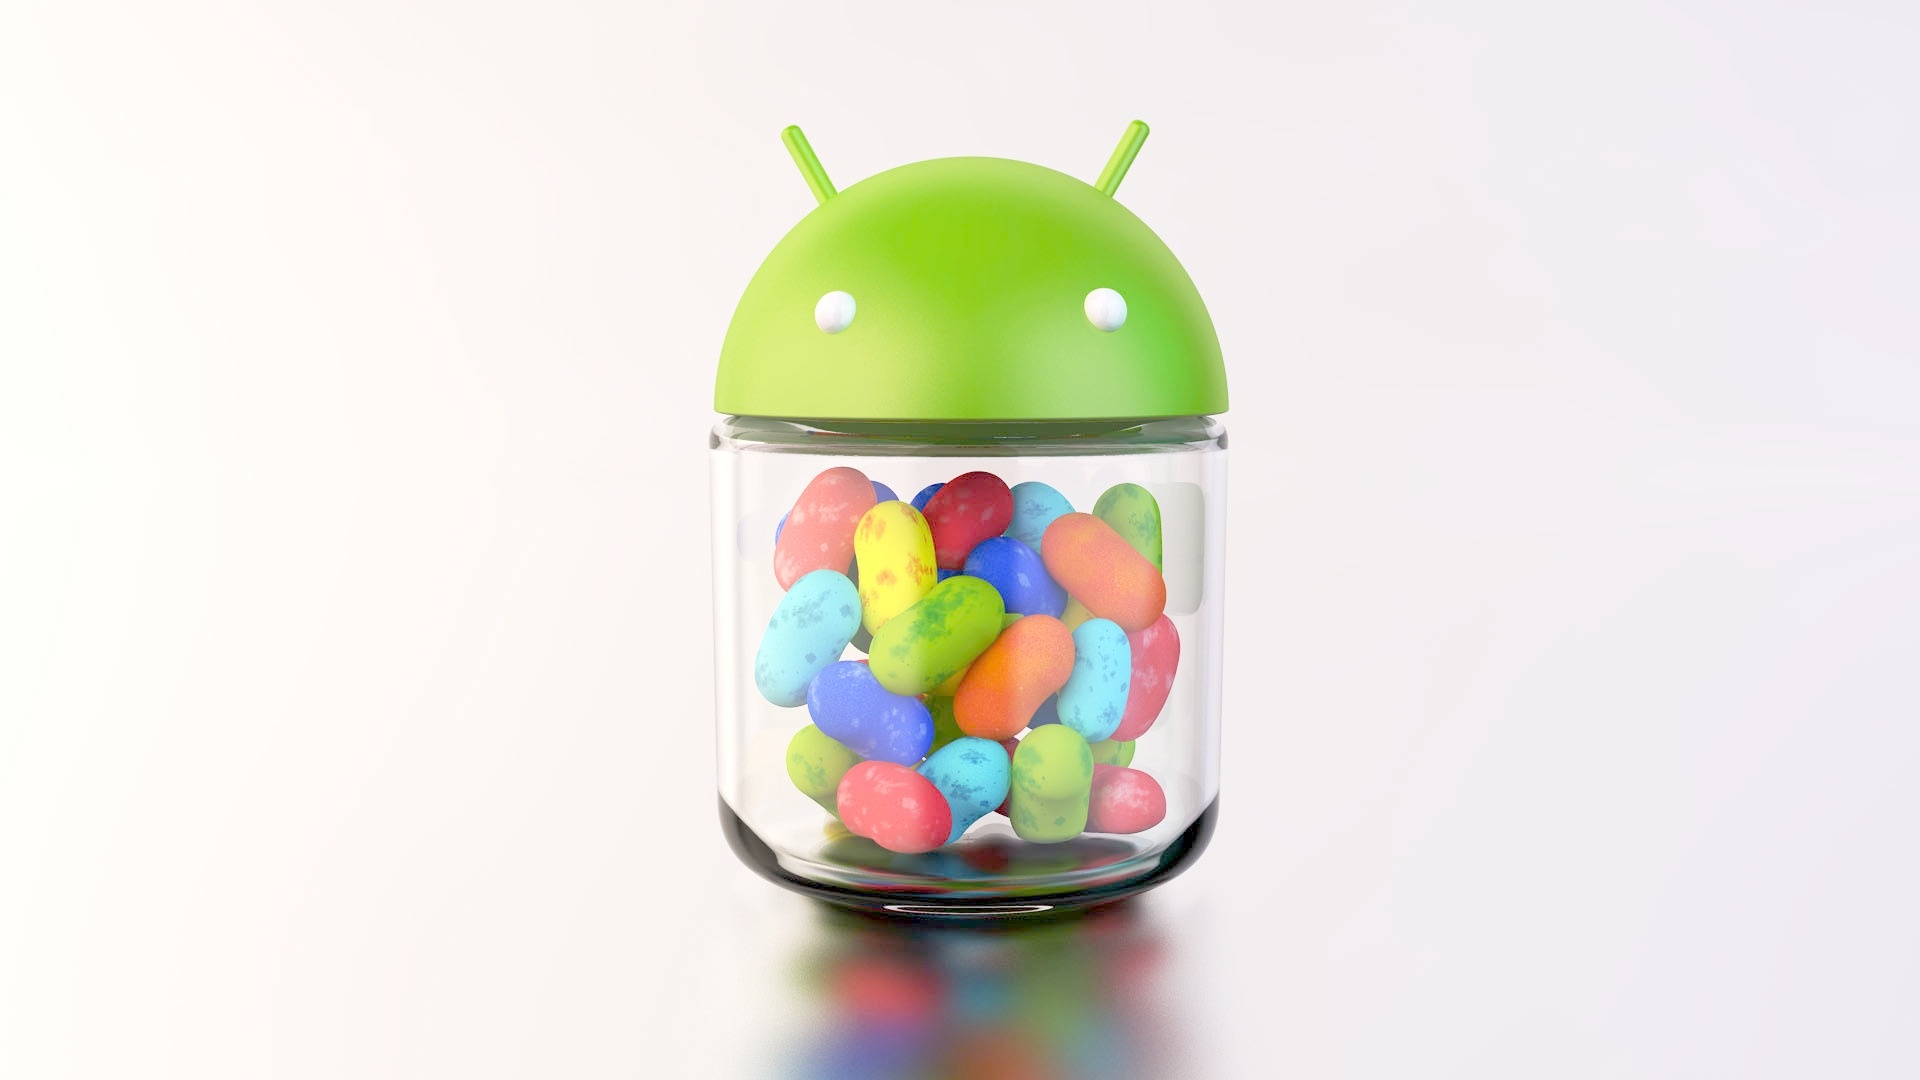 Jelly Beans, Android tips and tricks, Jelly bean version, Tech-savvy guide, 1920x1080 Full HD Desktop